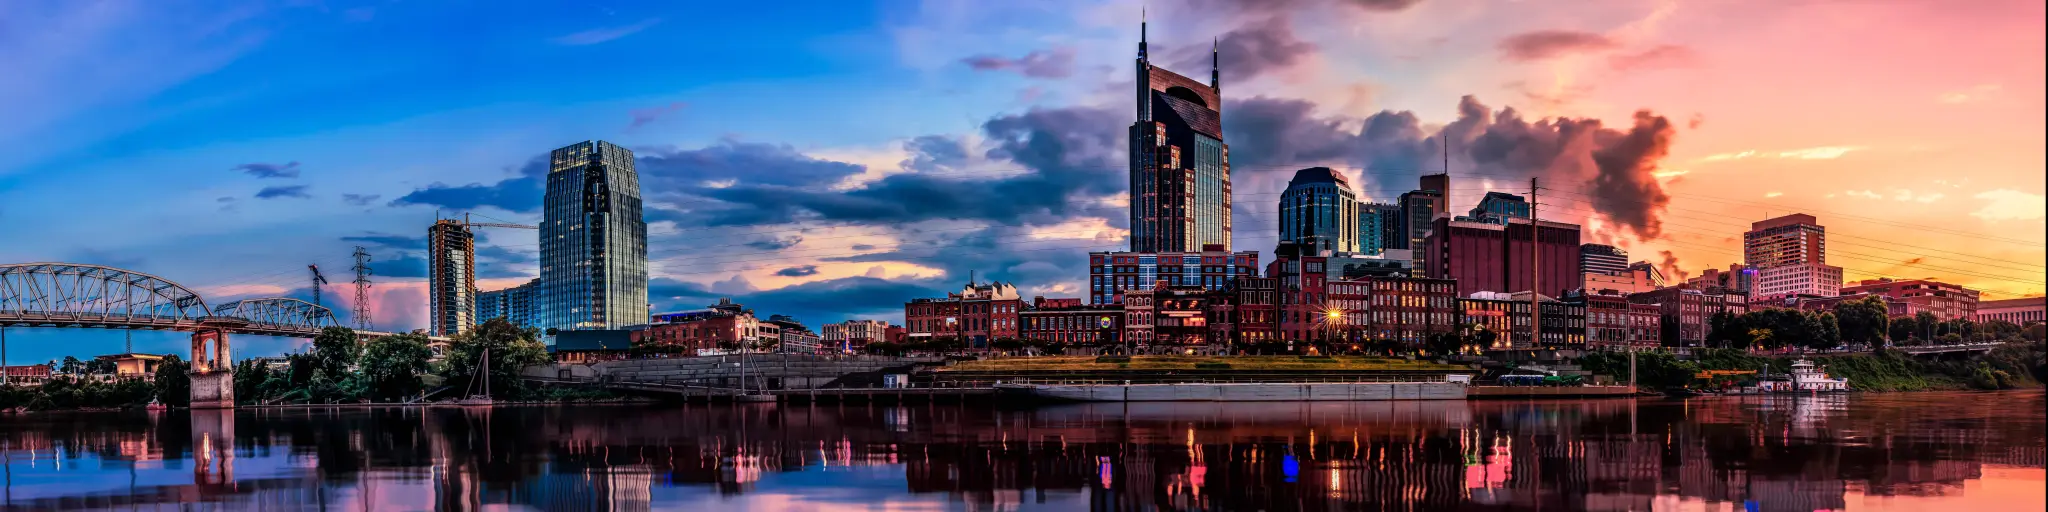 Nashville, TN, USA with the city skyline in the background and reflecting in the river in the foreground, taken at early evening with a dramatic sky.